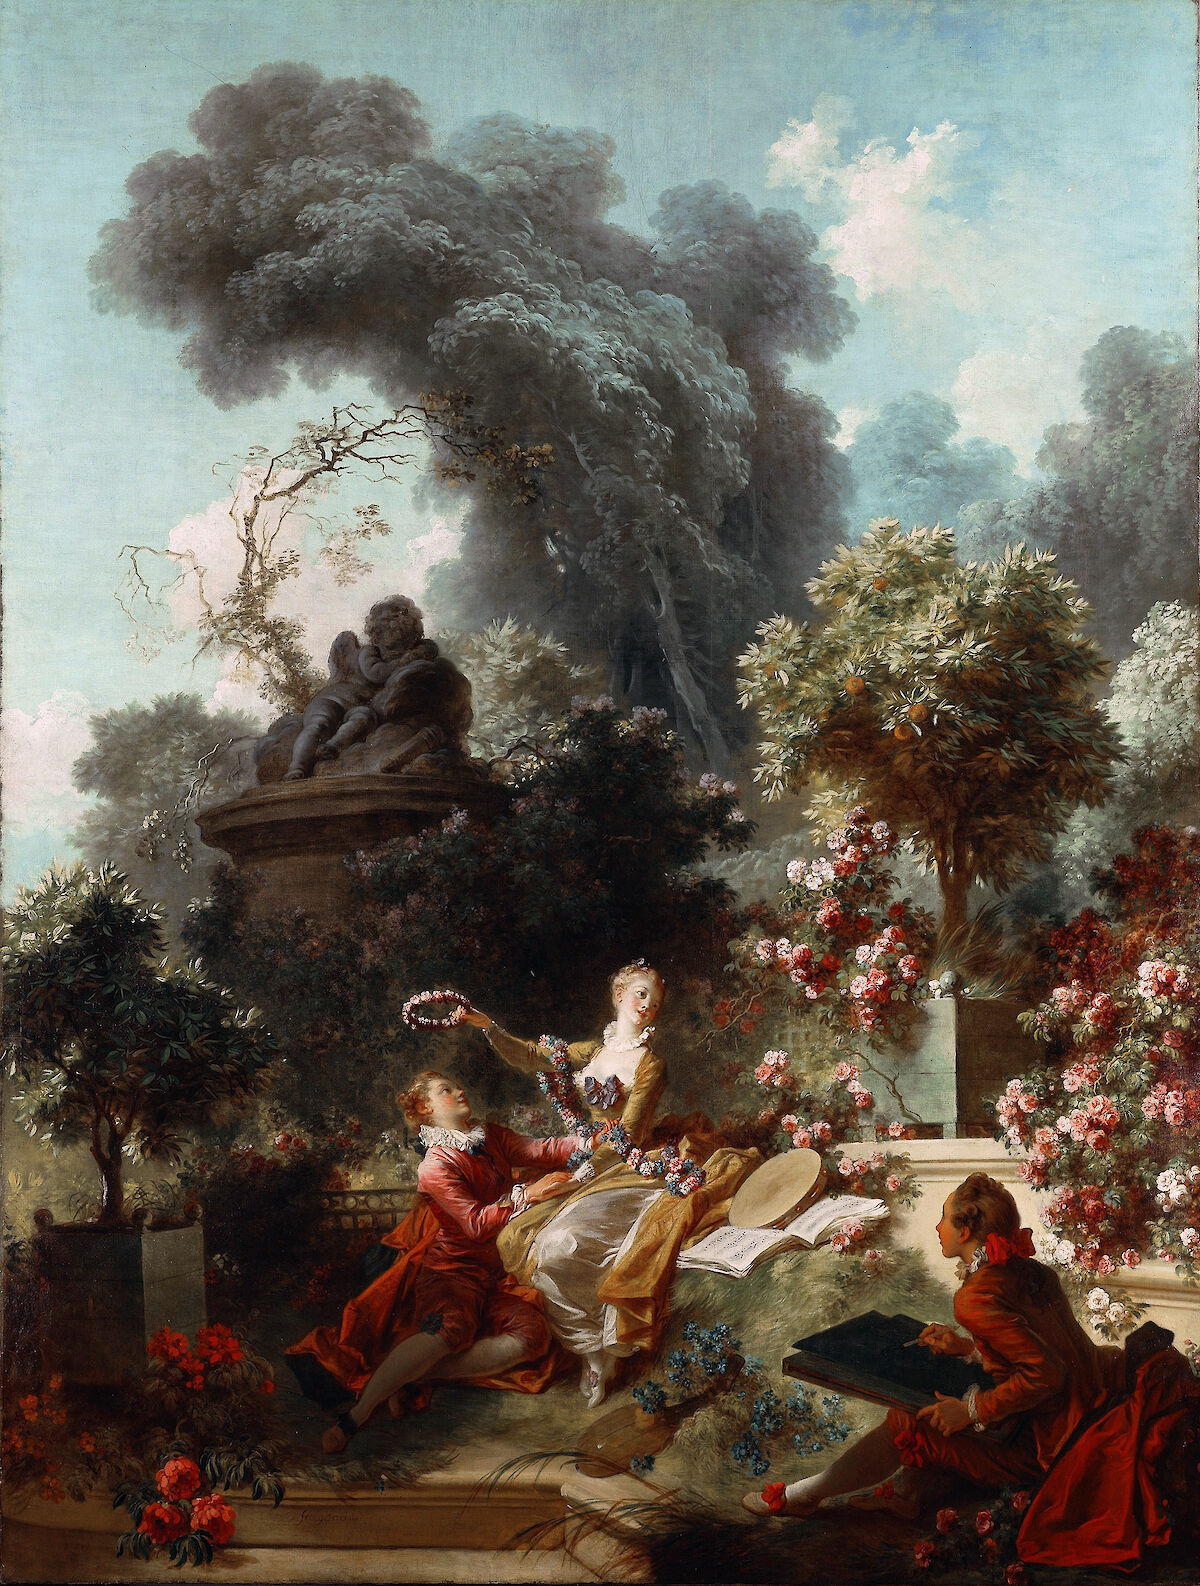 The Progress of Love - The Lover Crowned by Jean-Honoré Fragonard